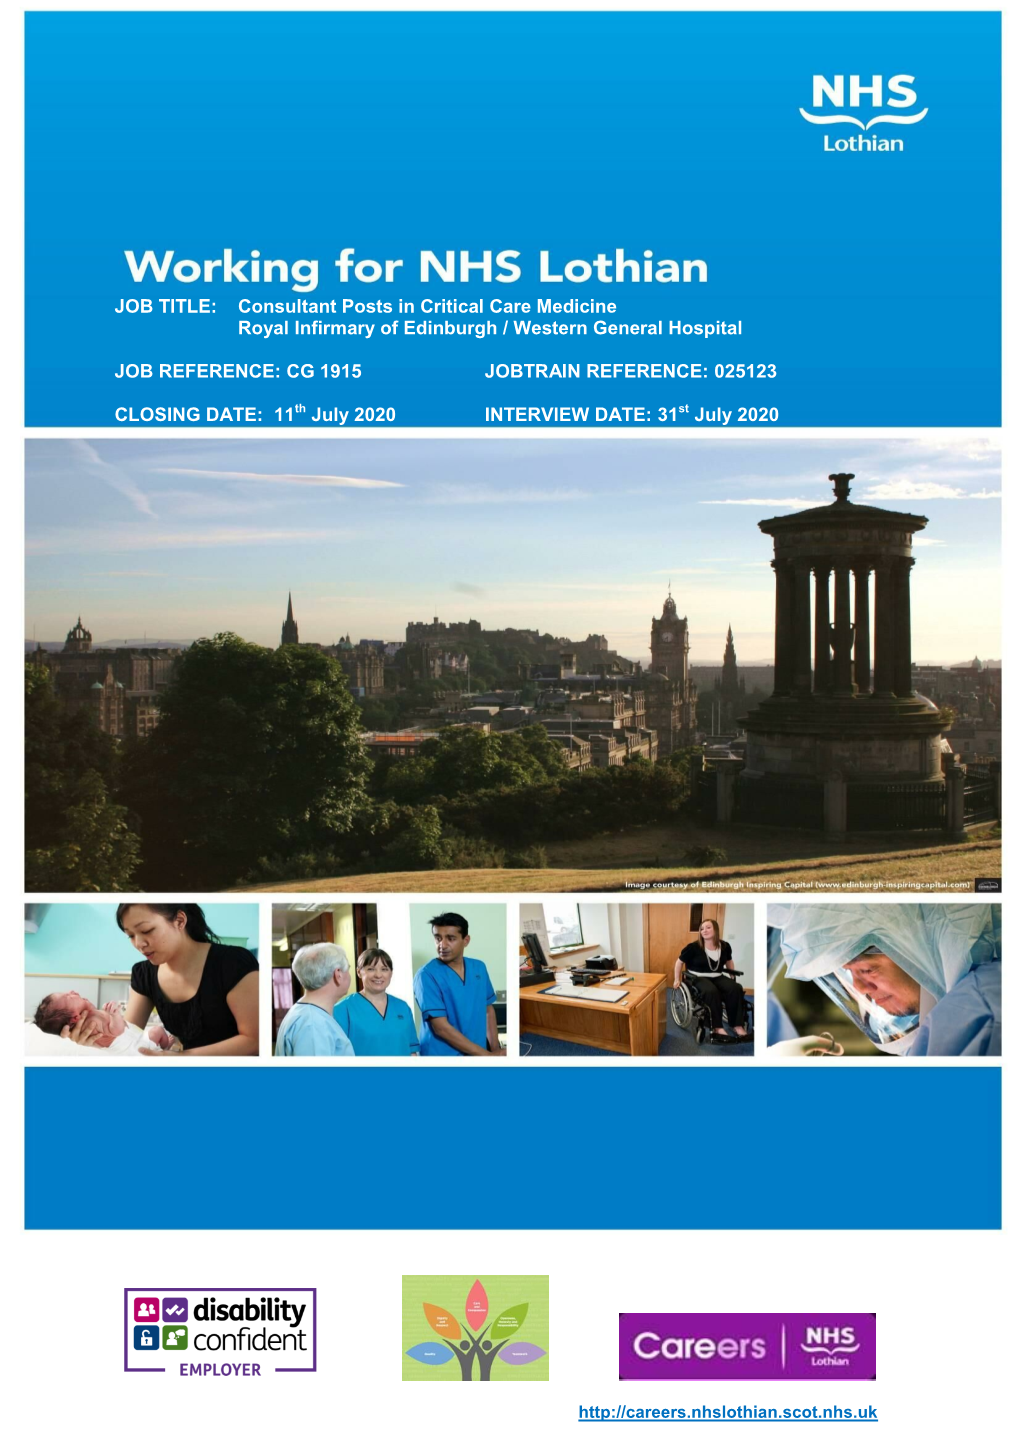 Consultant Posts in Critical Care Medicine Royal Infirmary of Edinburgh / Western General Hospital